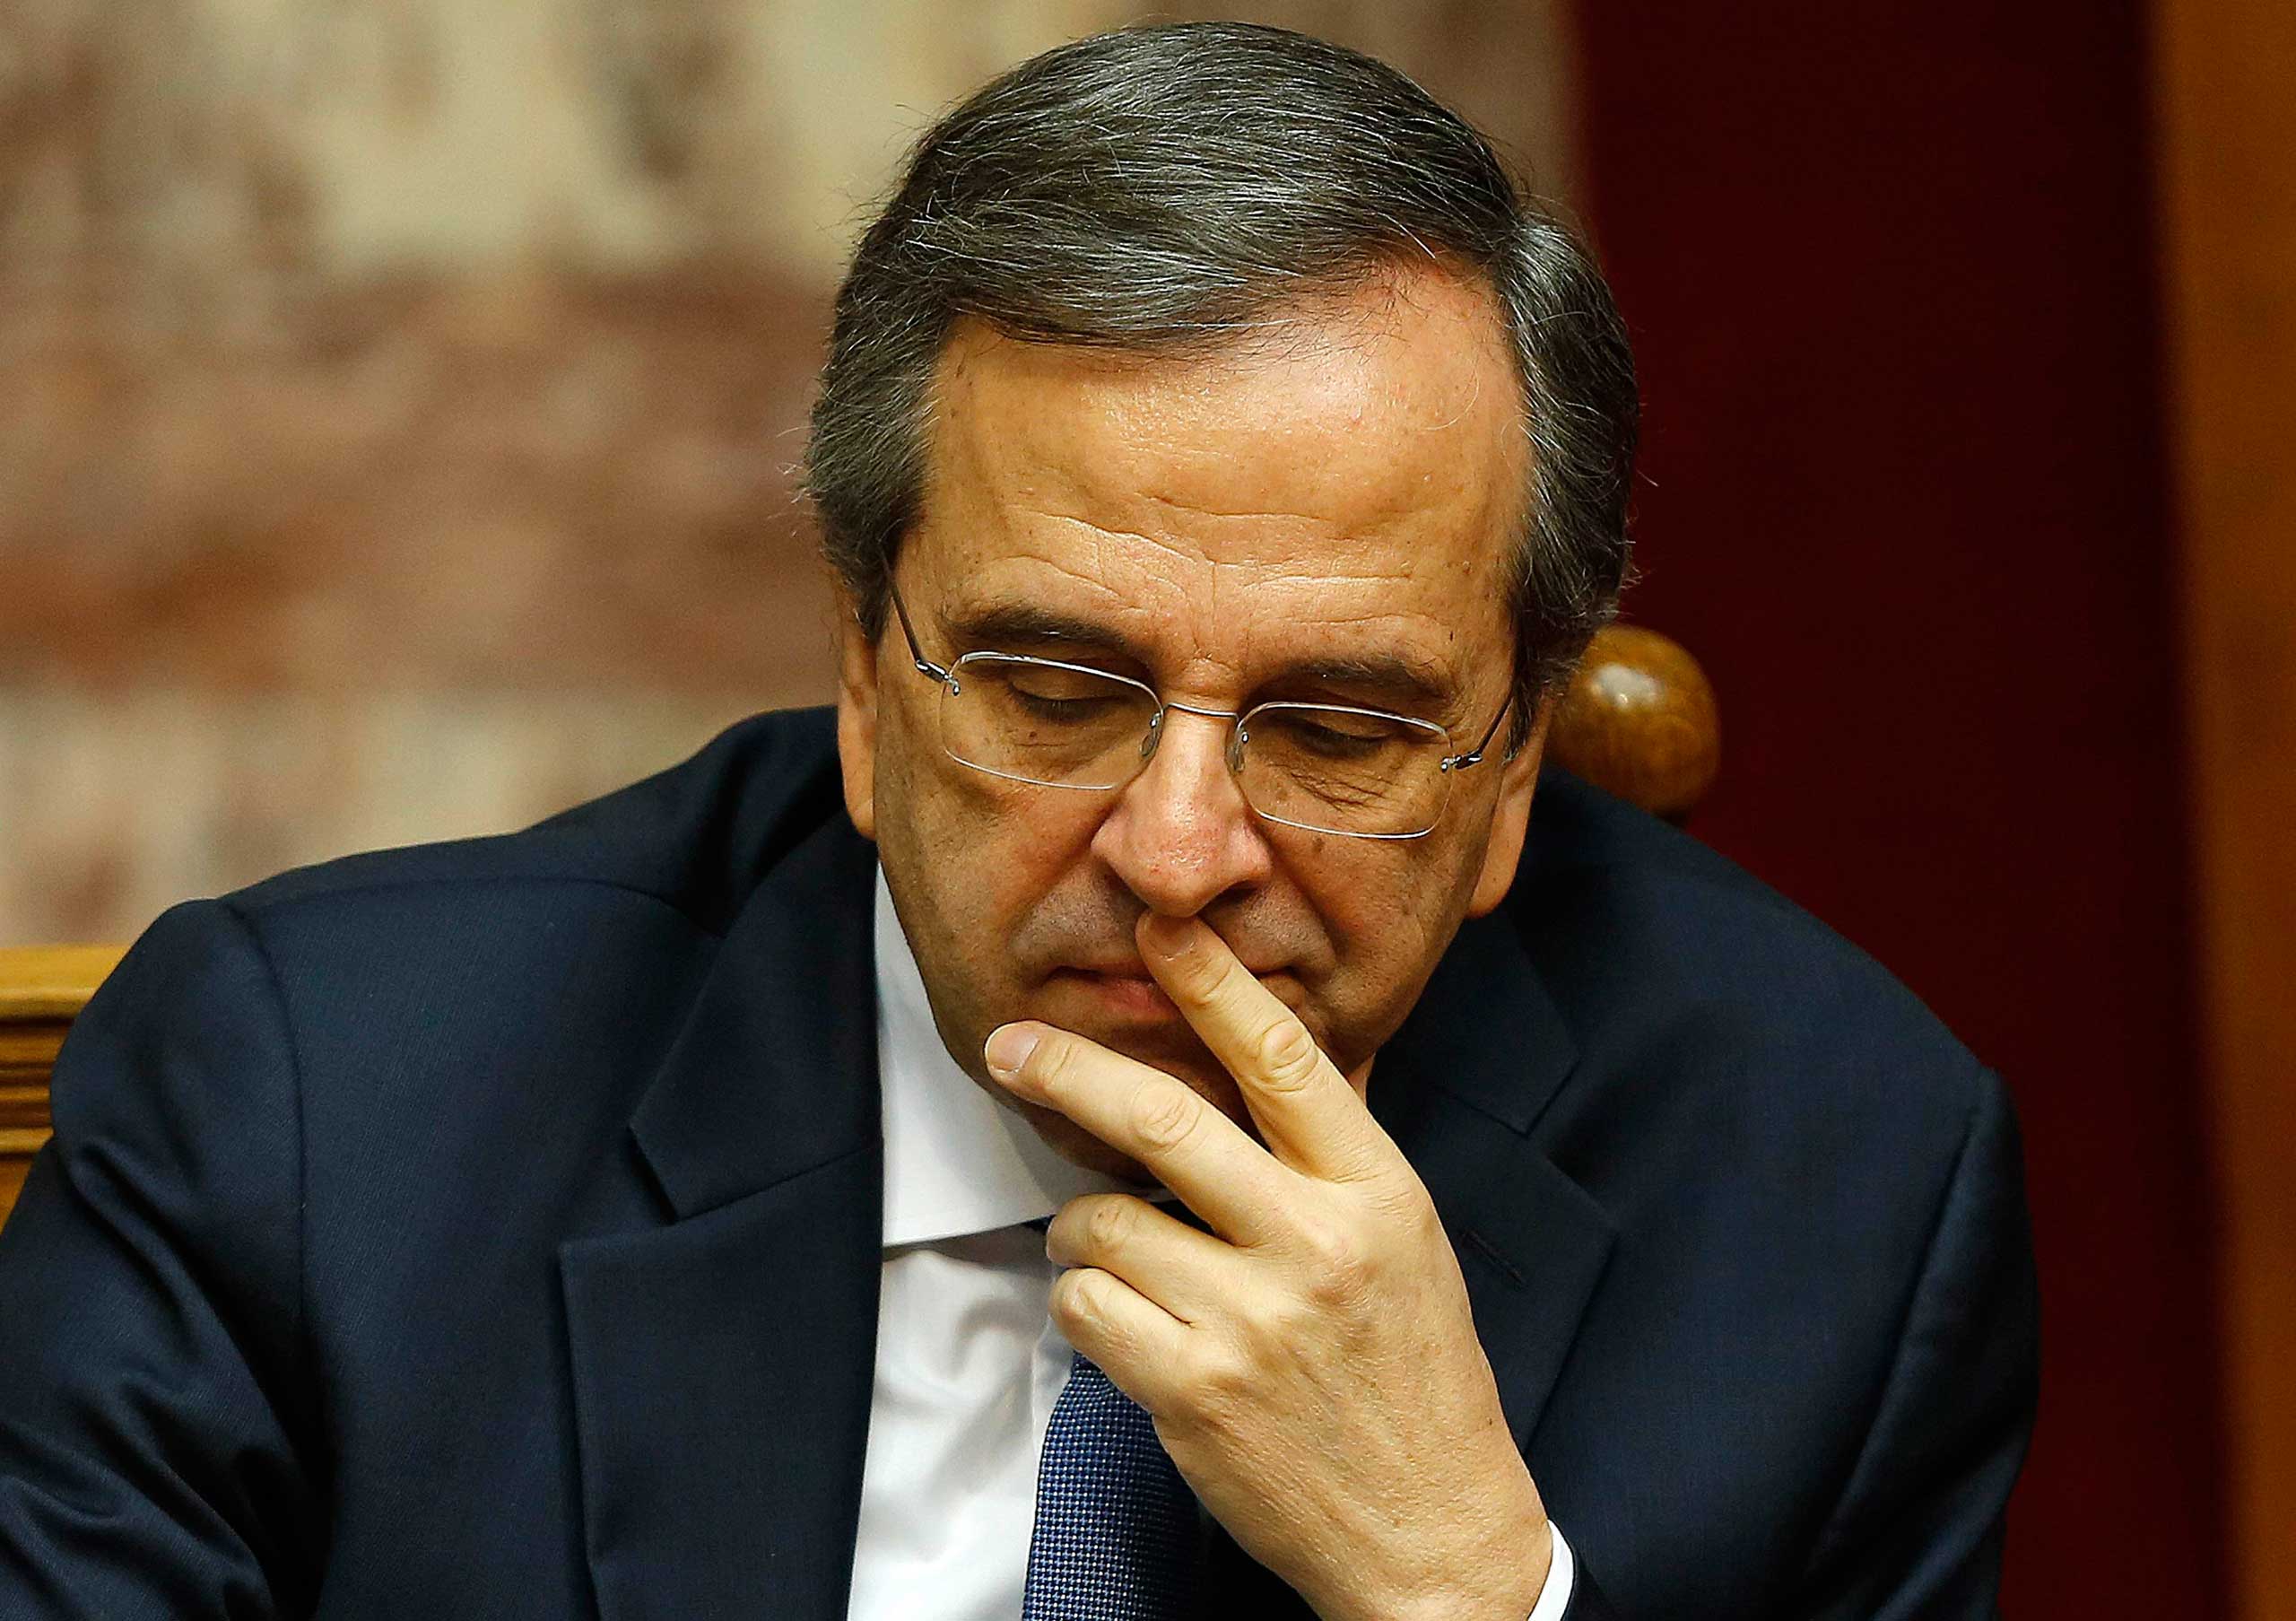 Greek Prime Minister Antonis Samaras reacts in parliament during the last round of a presidential vote in Athens on Dec. 29, 2014. (Yannis Behrakis—Reuters)